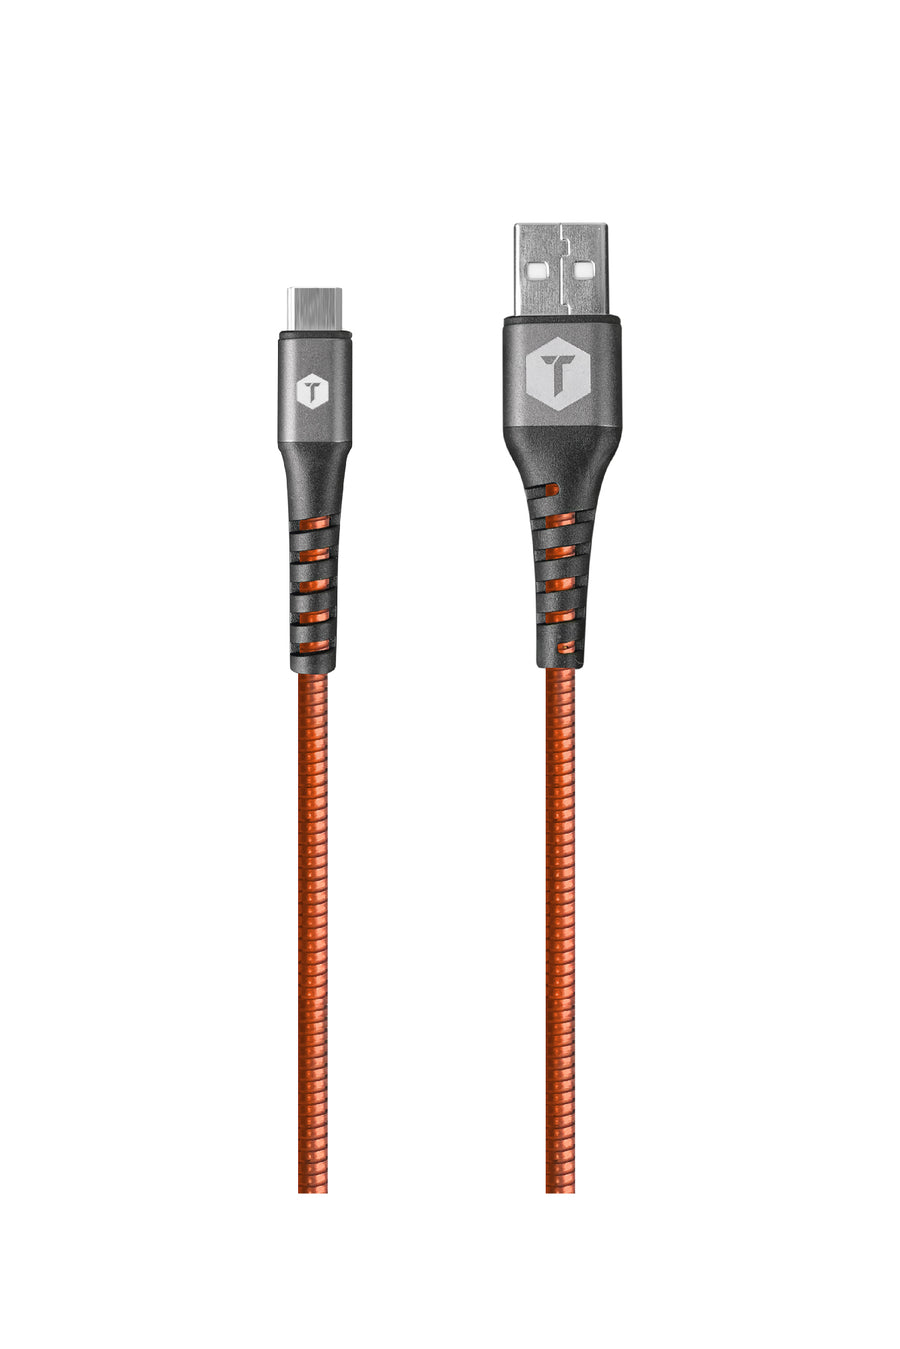 2 Ft. Armor-Flex USB Type C to A Cable